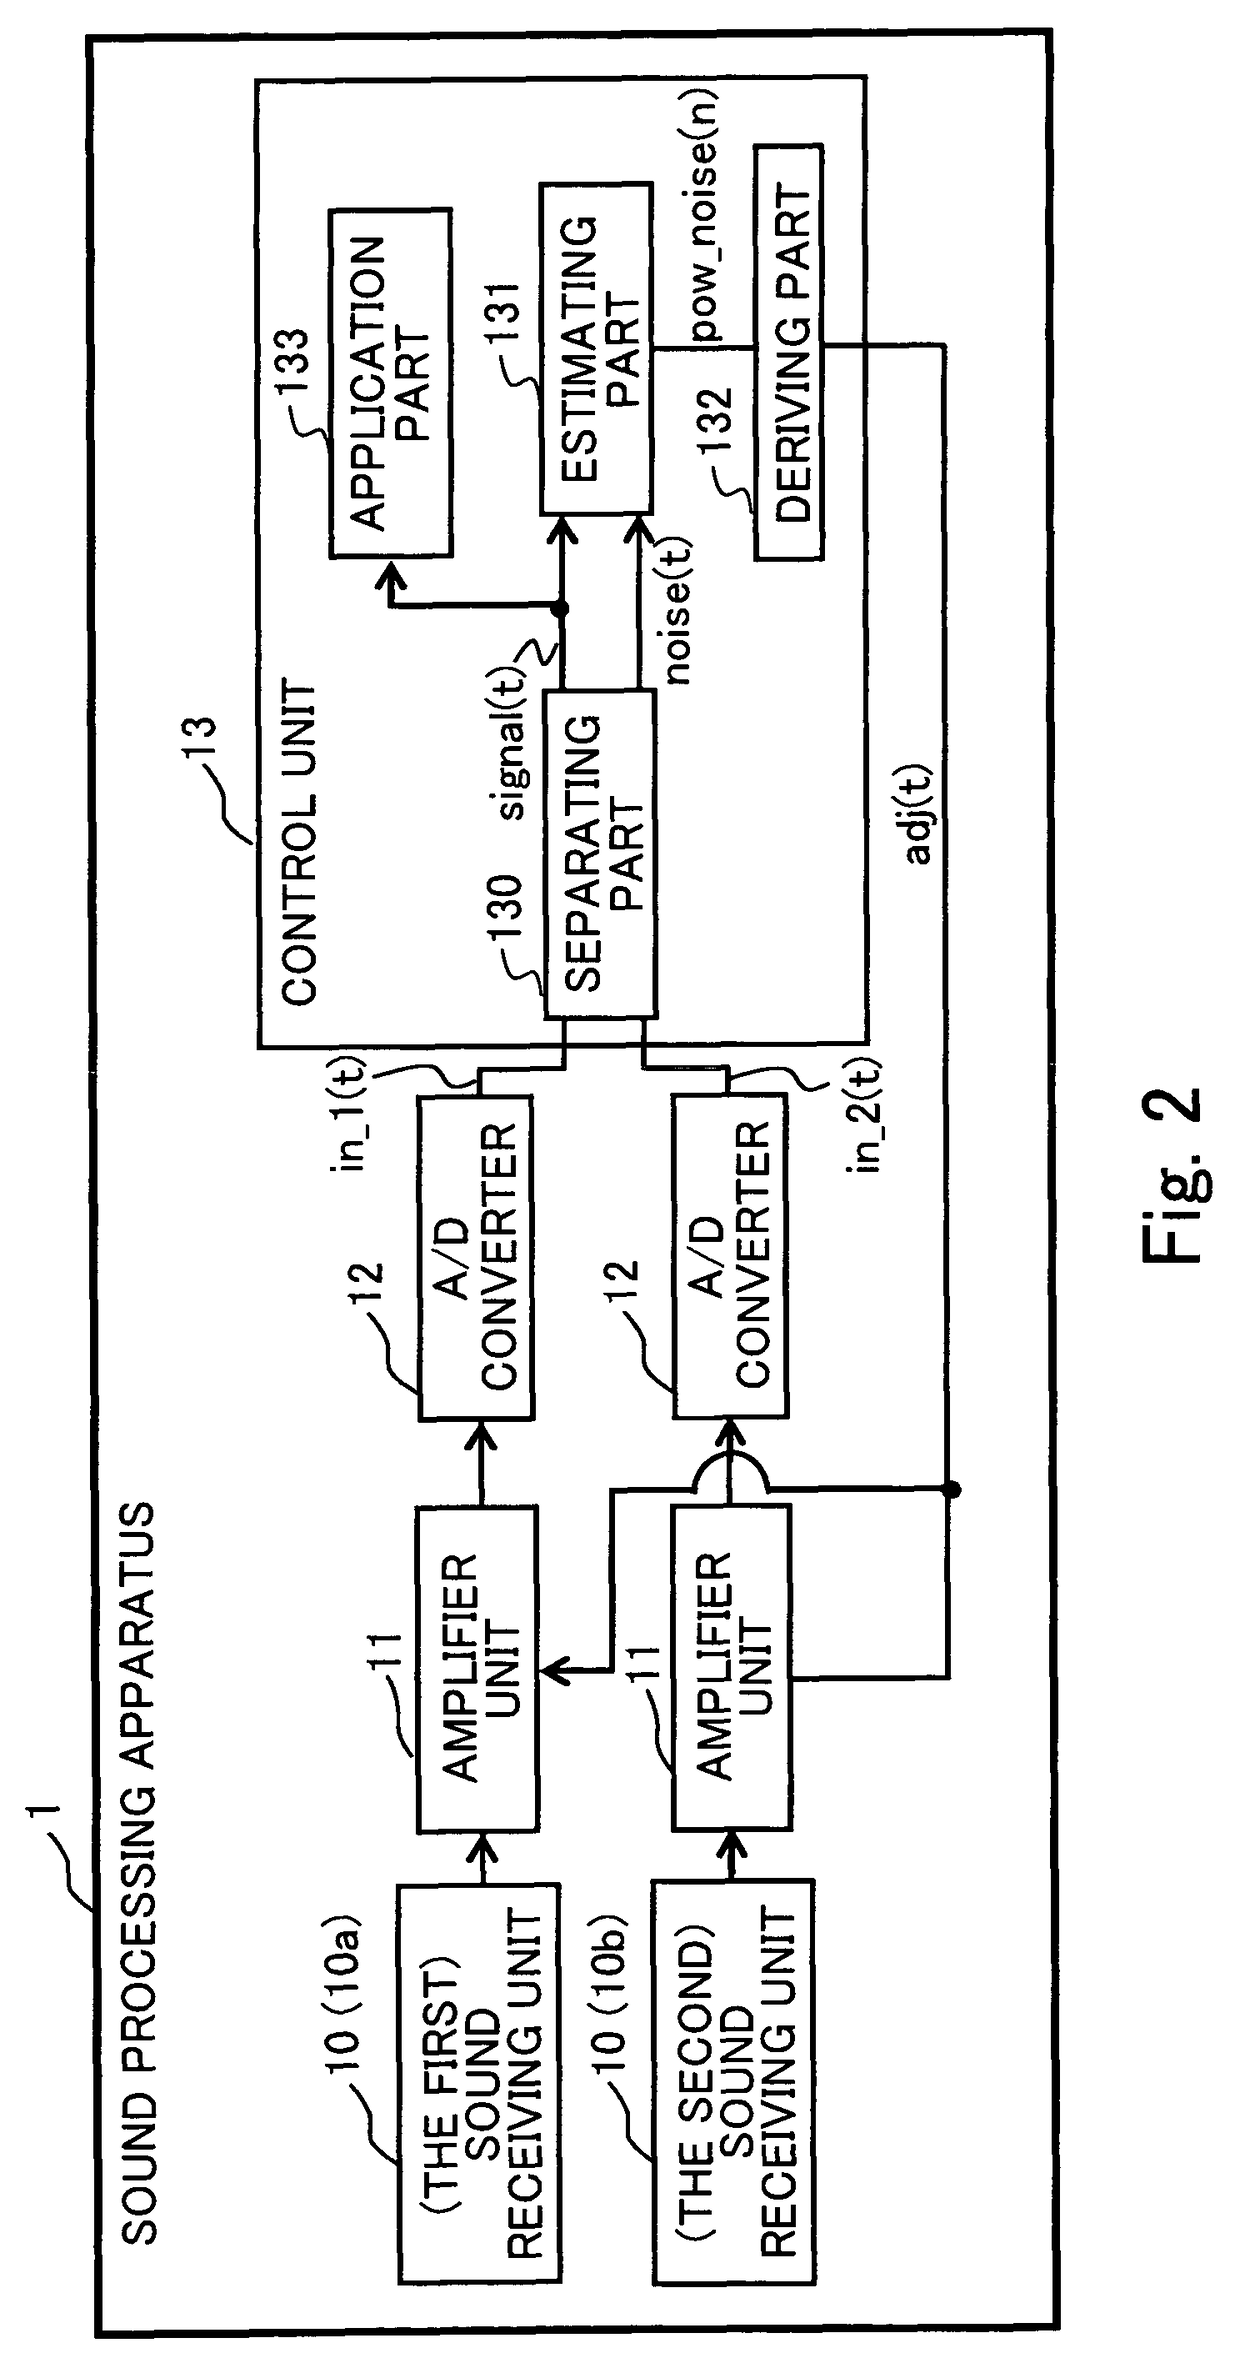 Sound processing apparatus, apparatus and method for controlling gain, and computer program